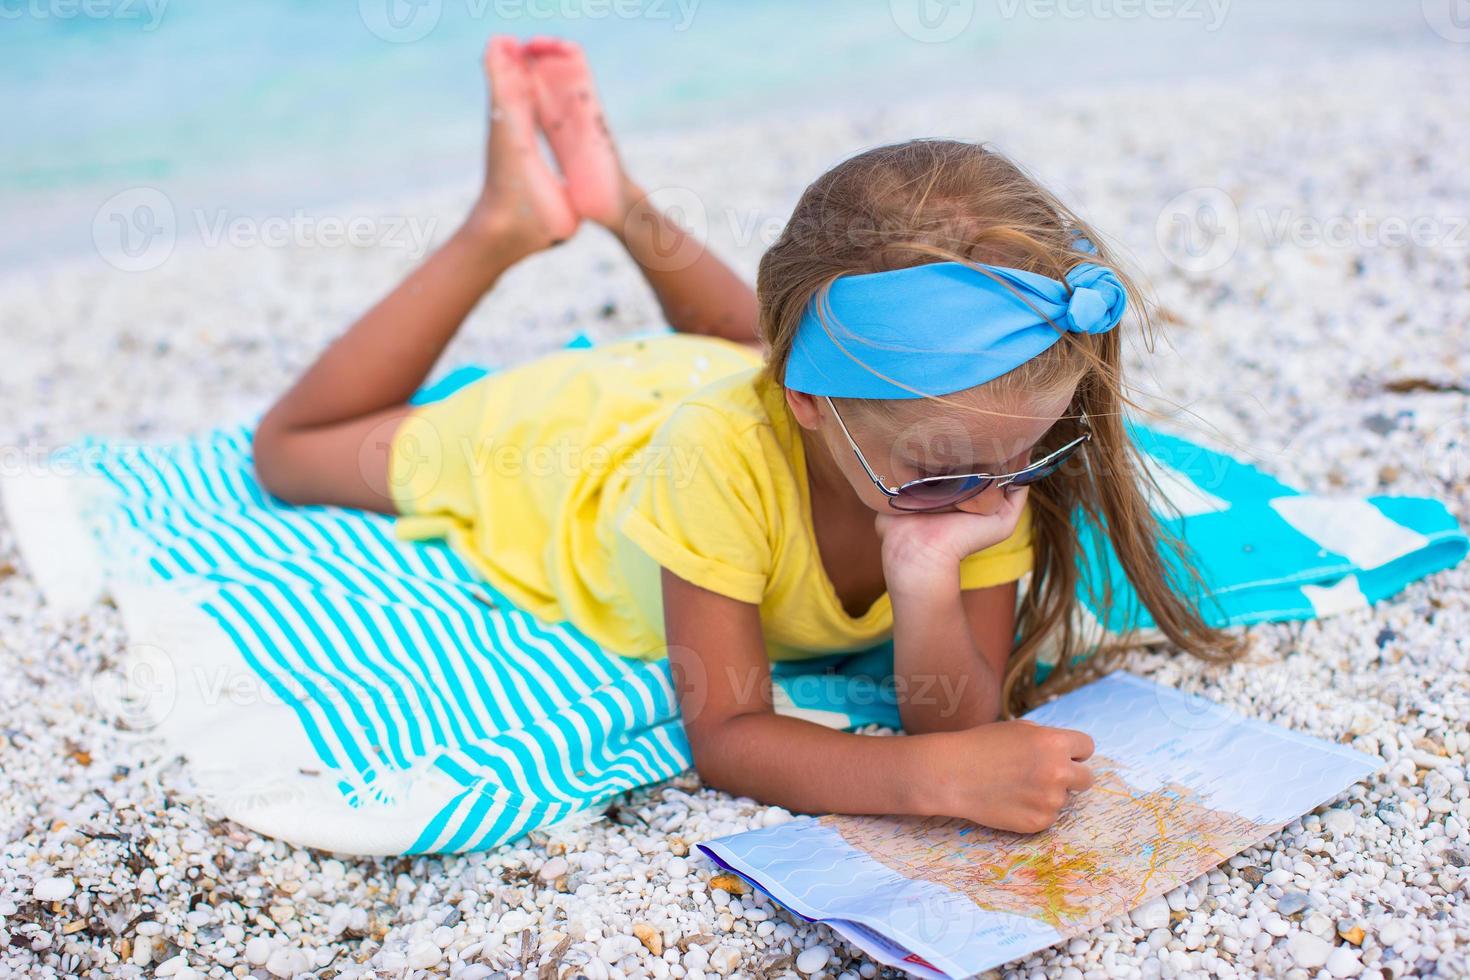 Adorable little girl with map find the way on tropical beach vacation photo